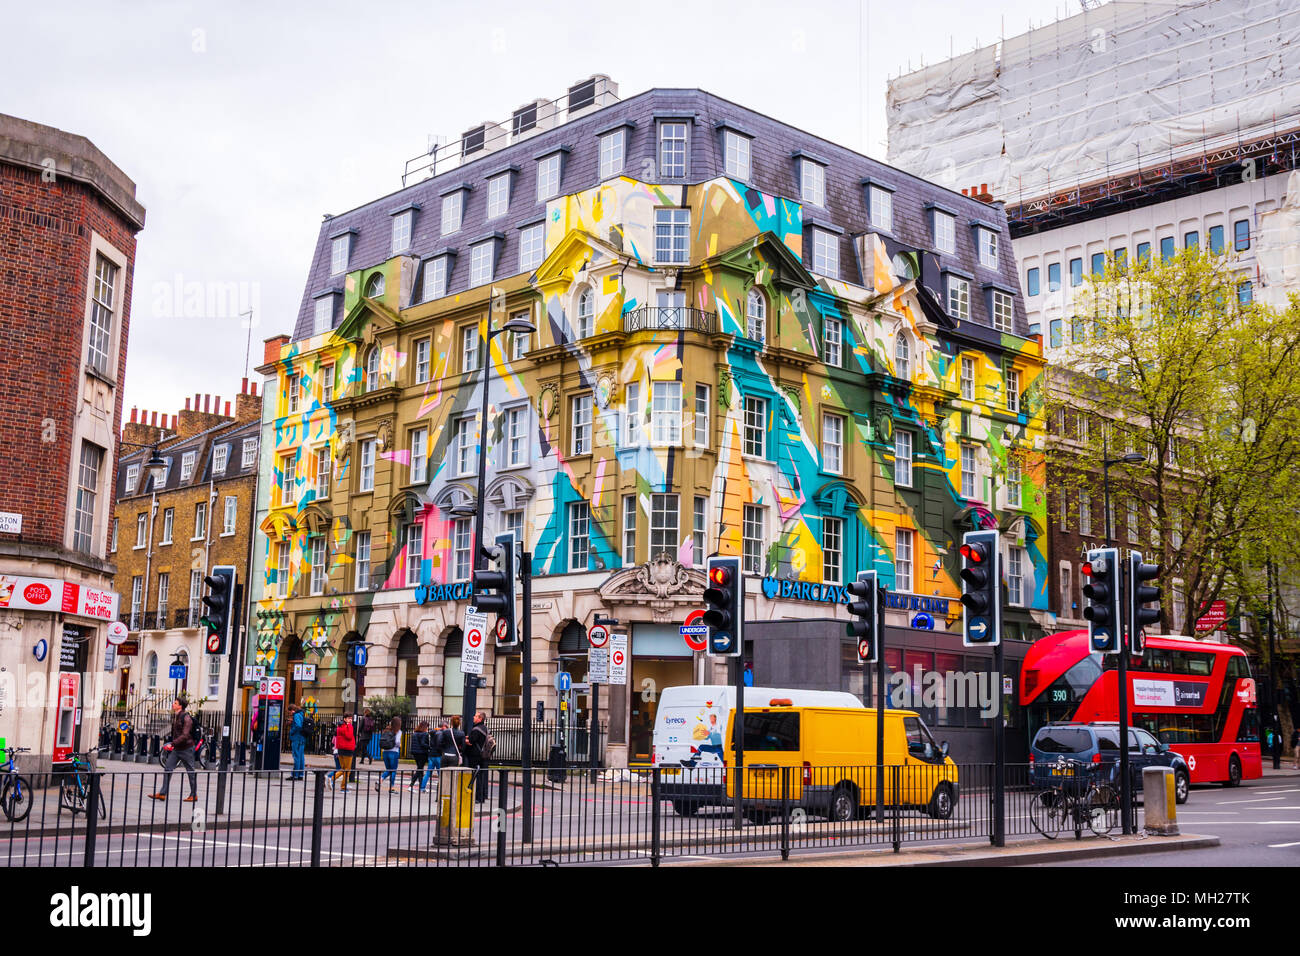 The Megaro hotel, a colourful building, opposite Kings Cross station in London UK Stock Photo